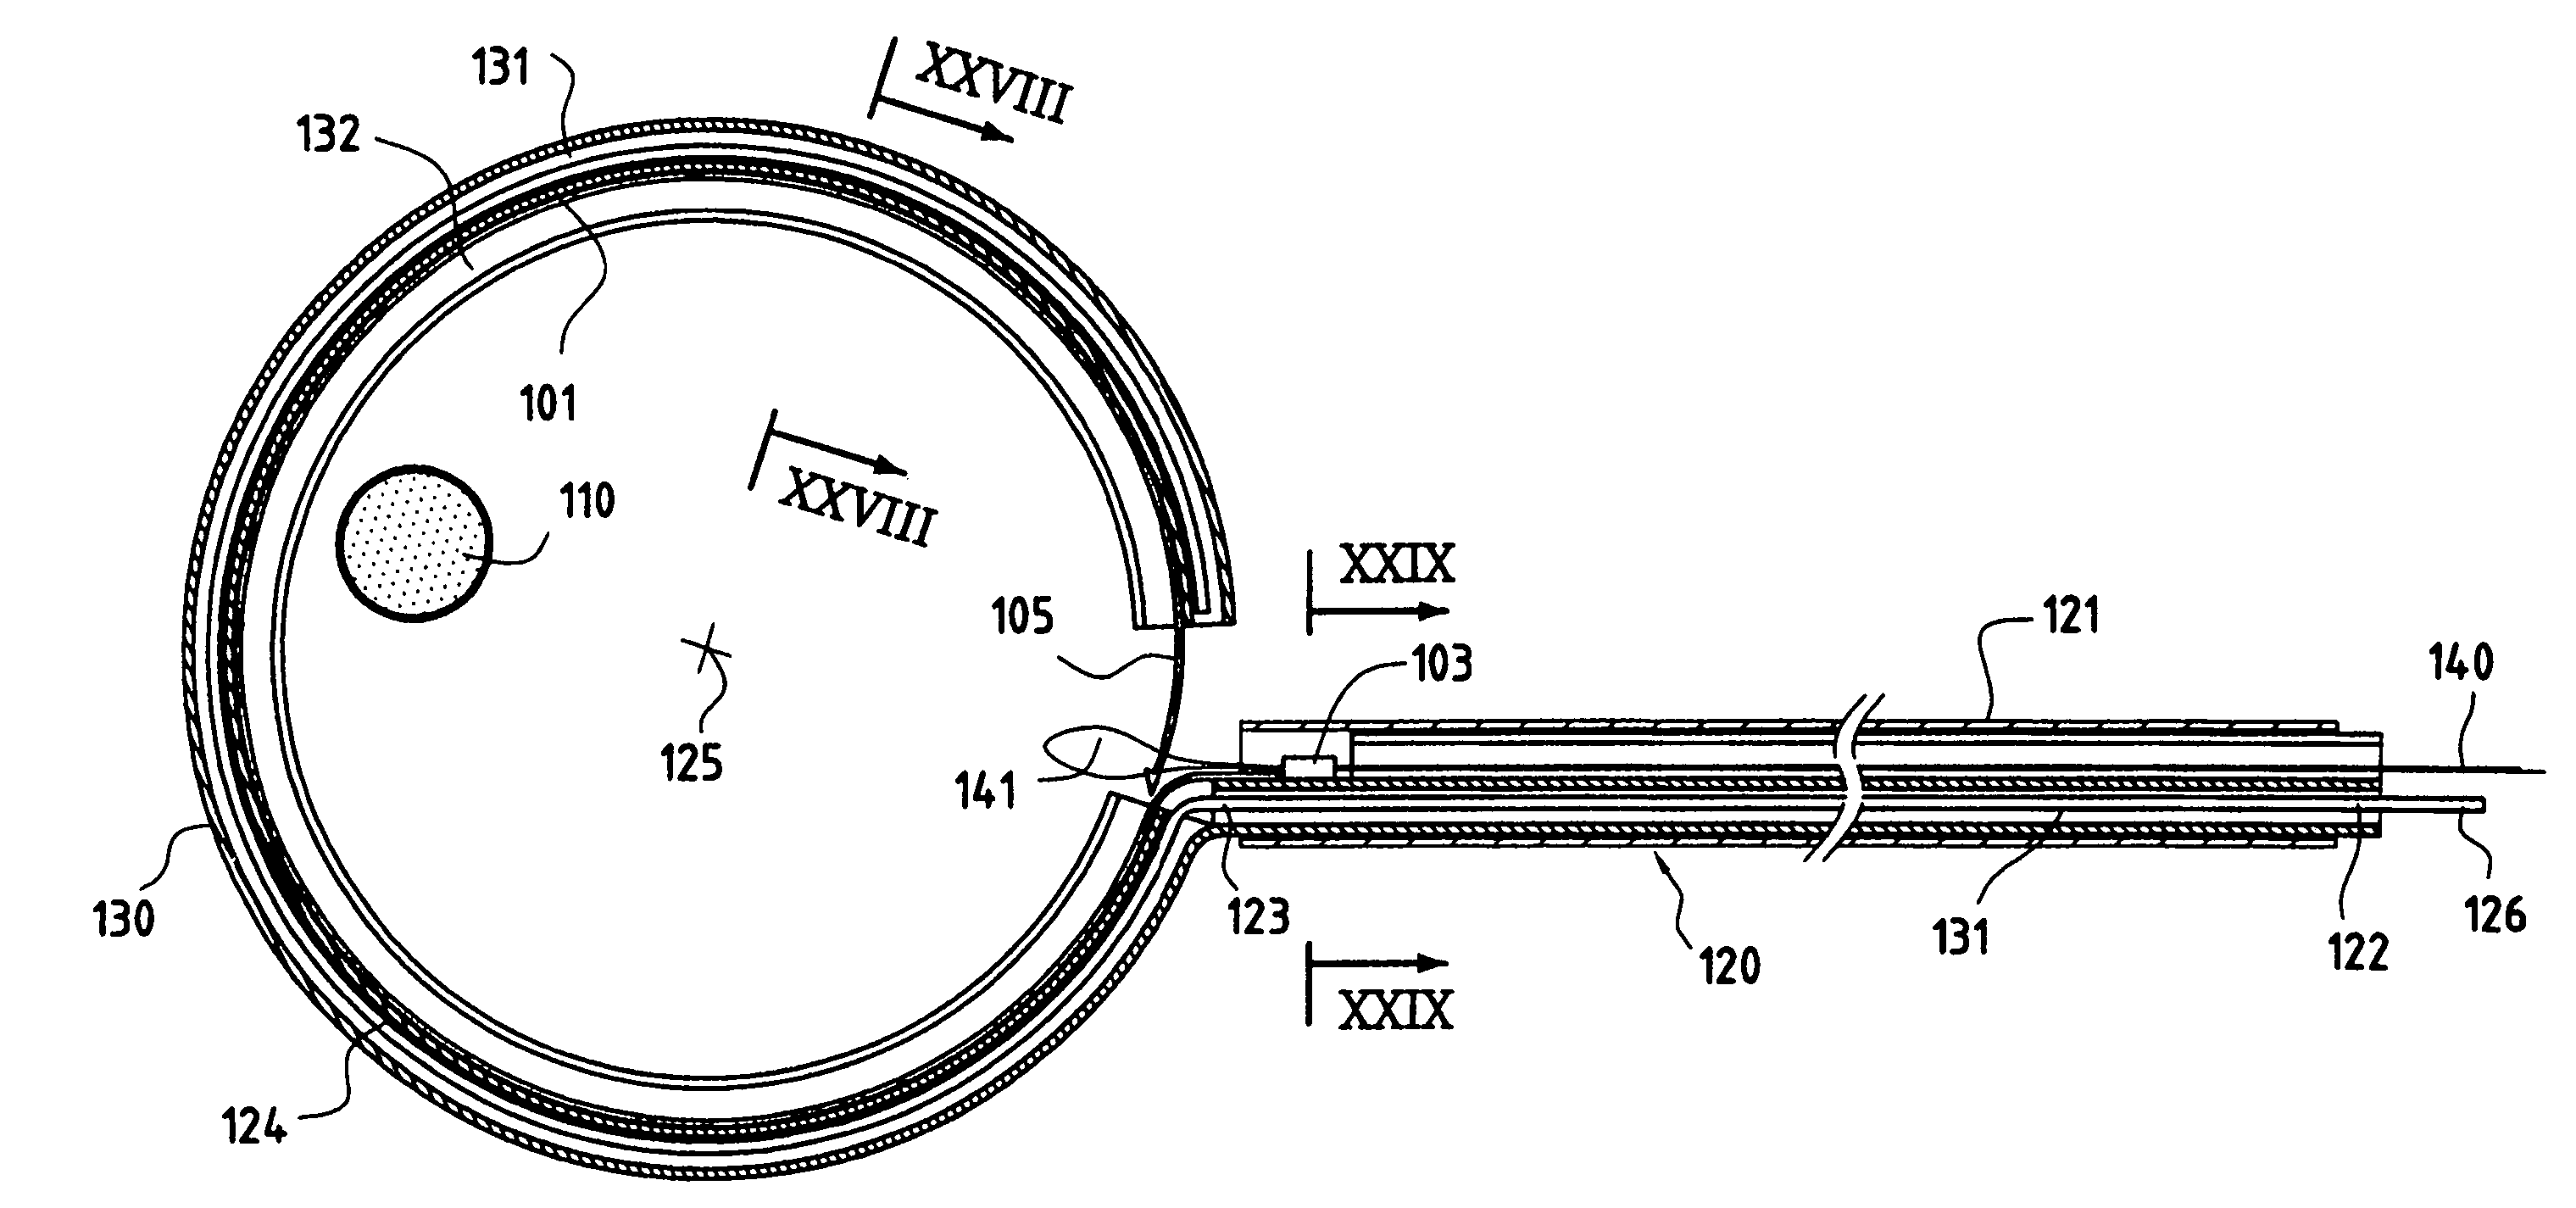 Device for ligating an anatomical structure